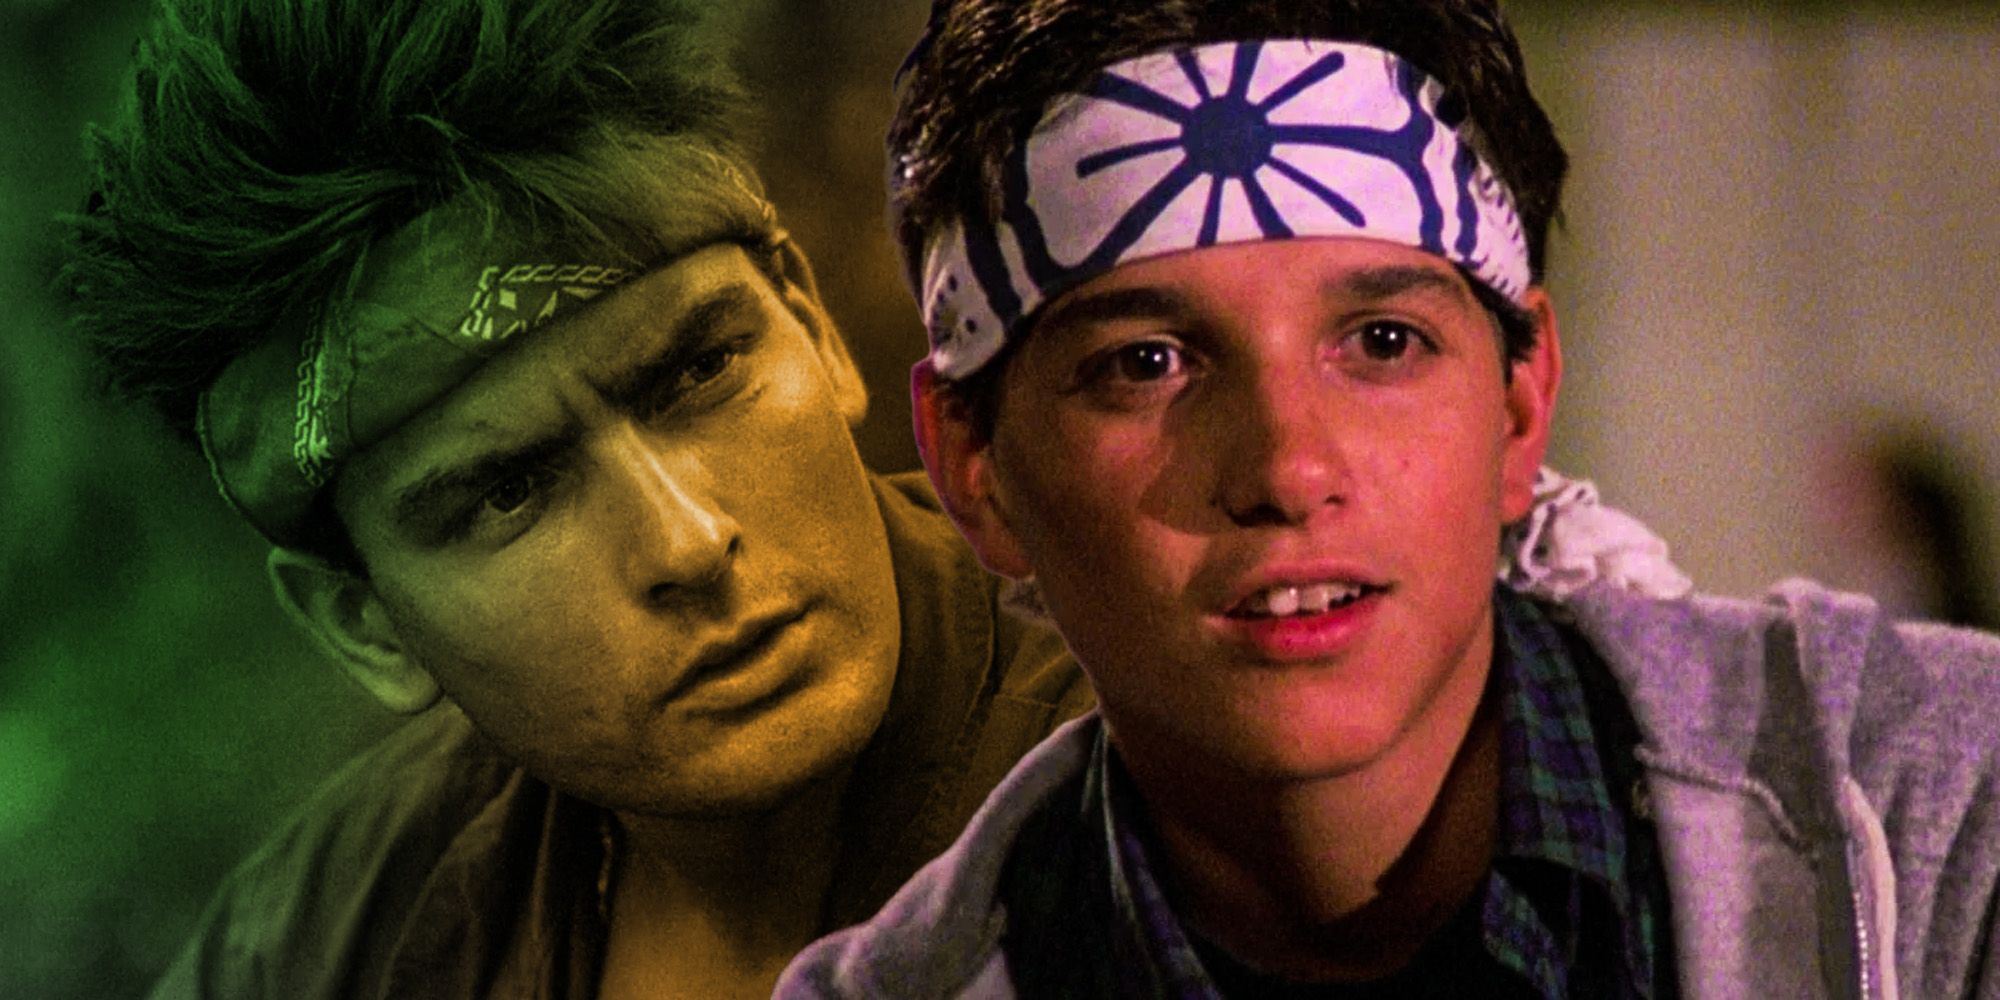 Karate Kid: Every Actor Who Almost Played Daniel LaRusso